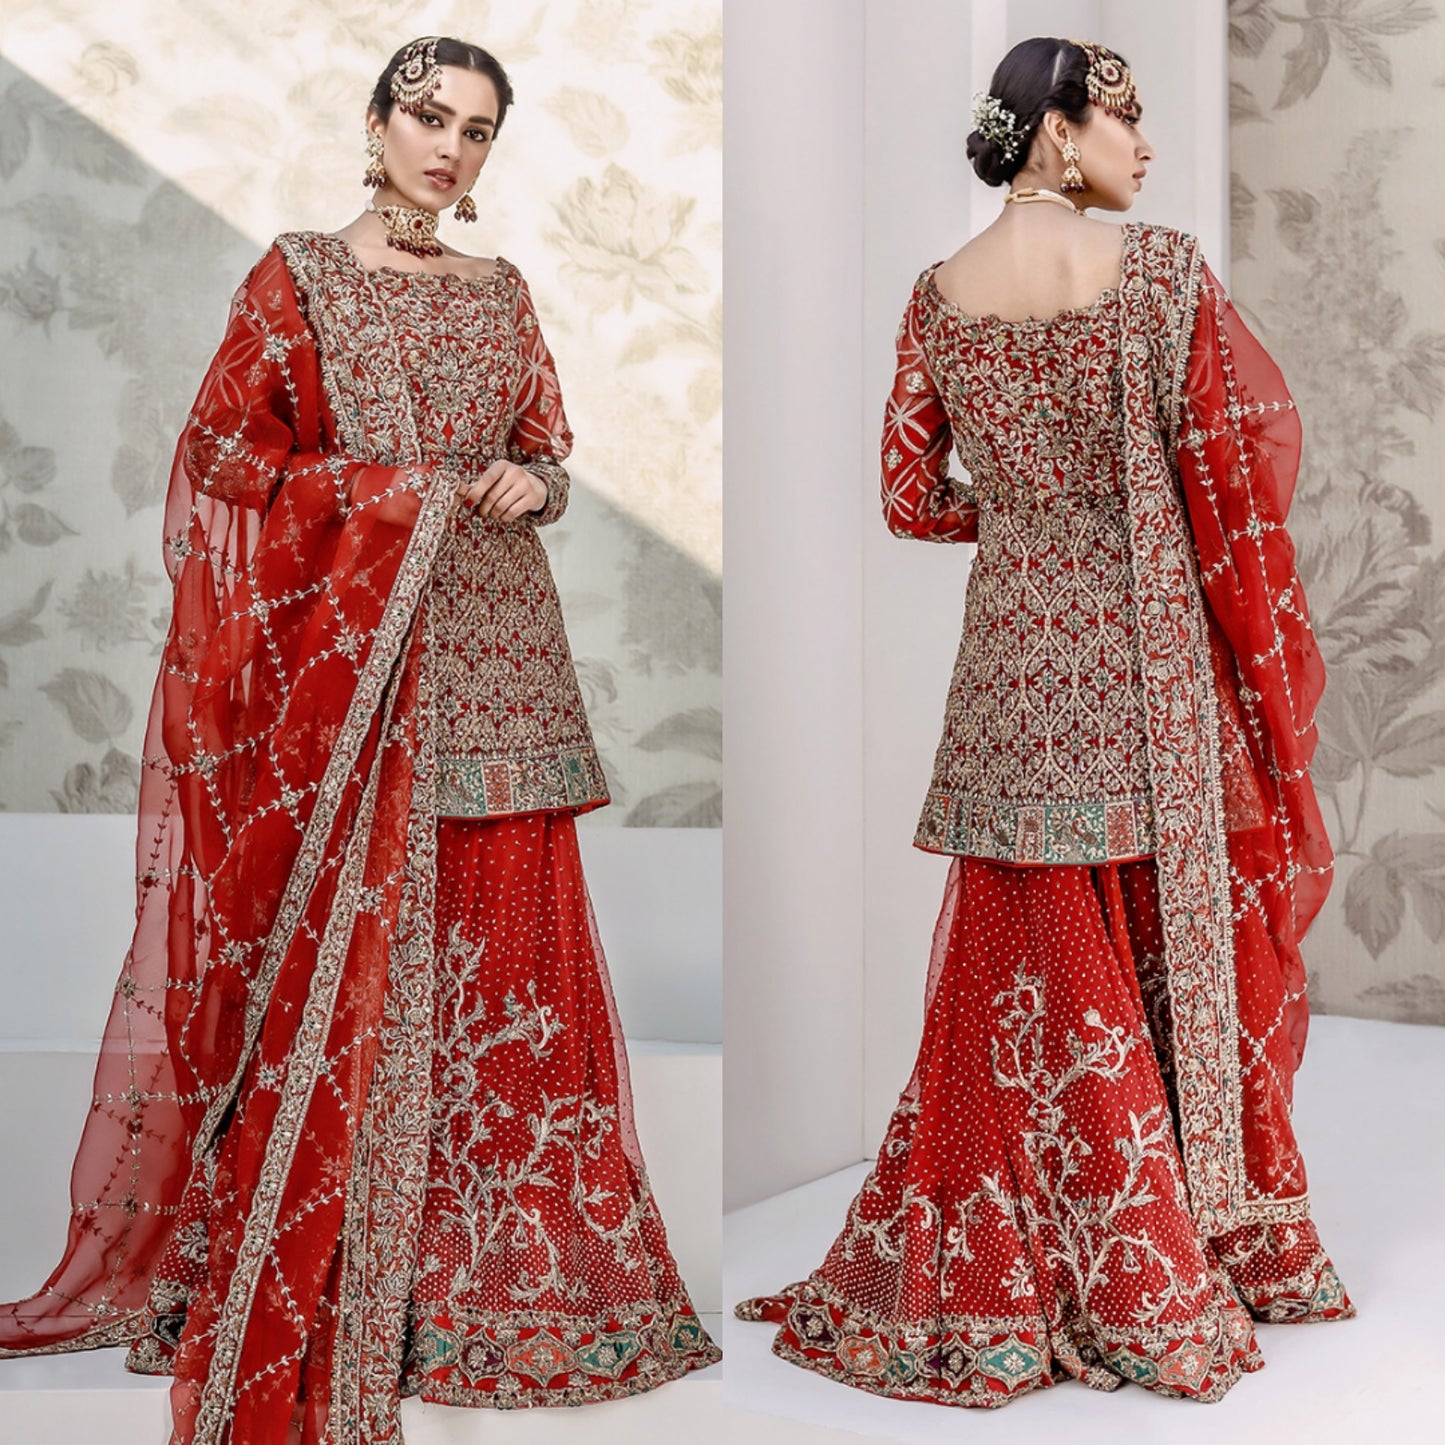 RABIA ZAHUR - The most regal (Made To Order)